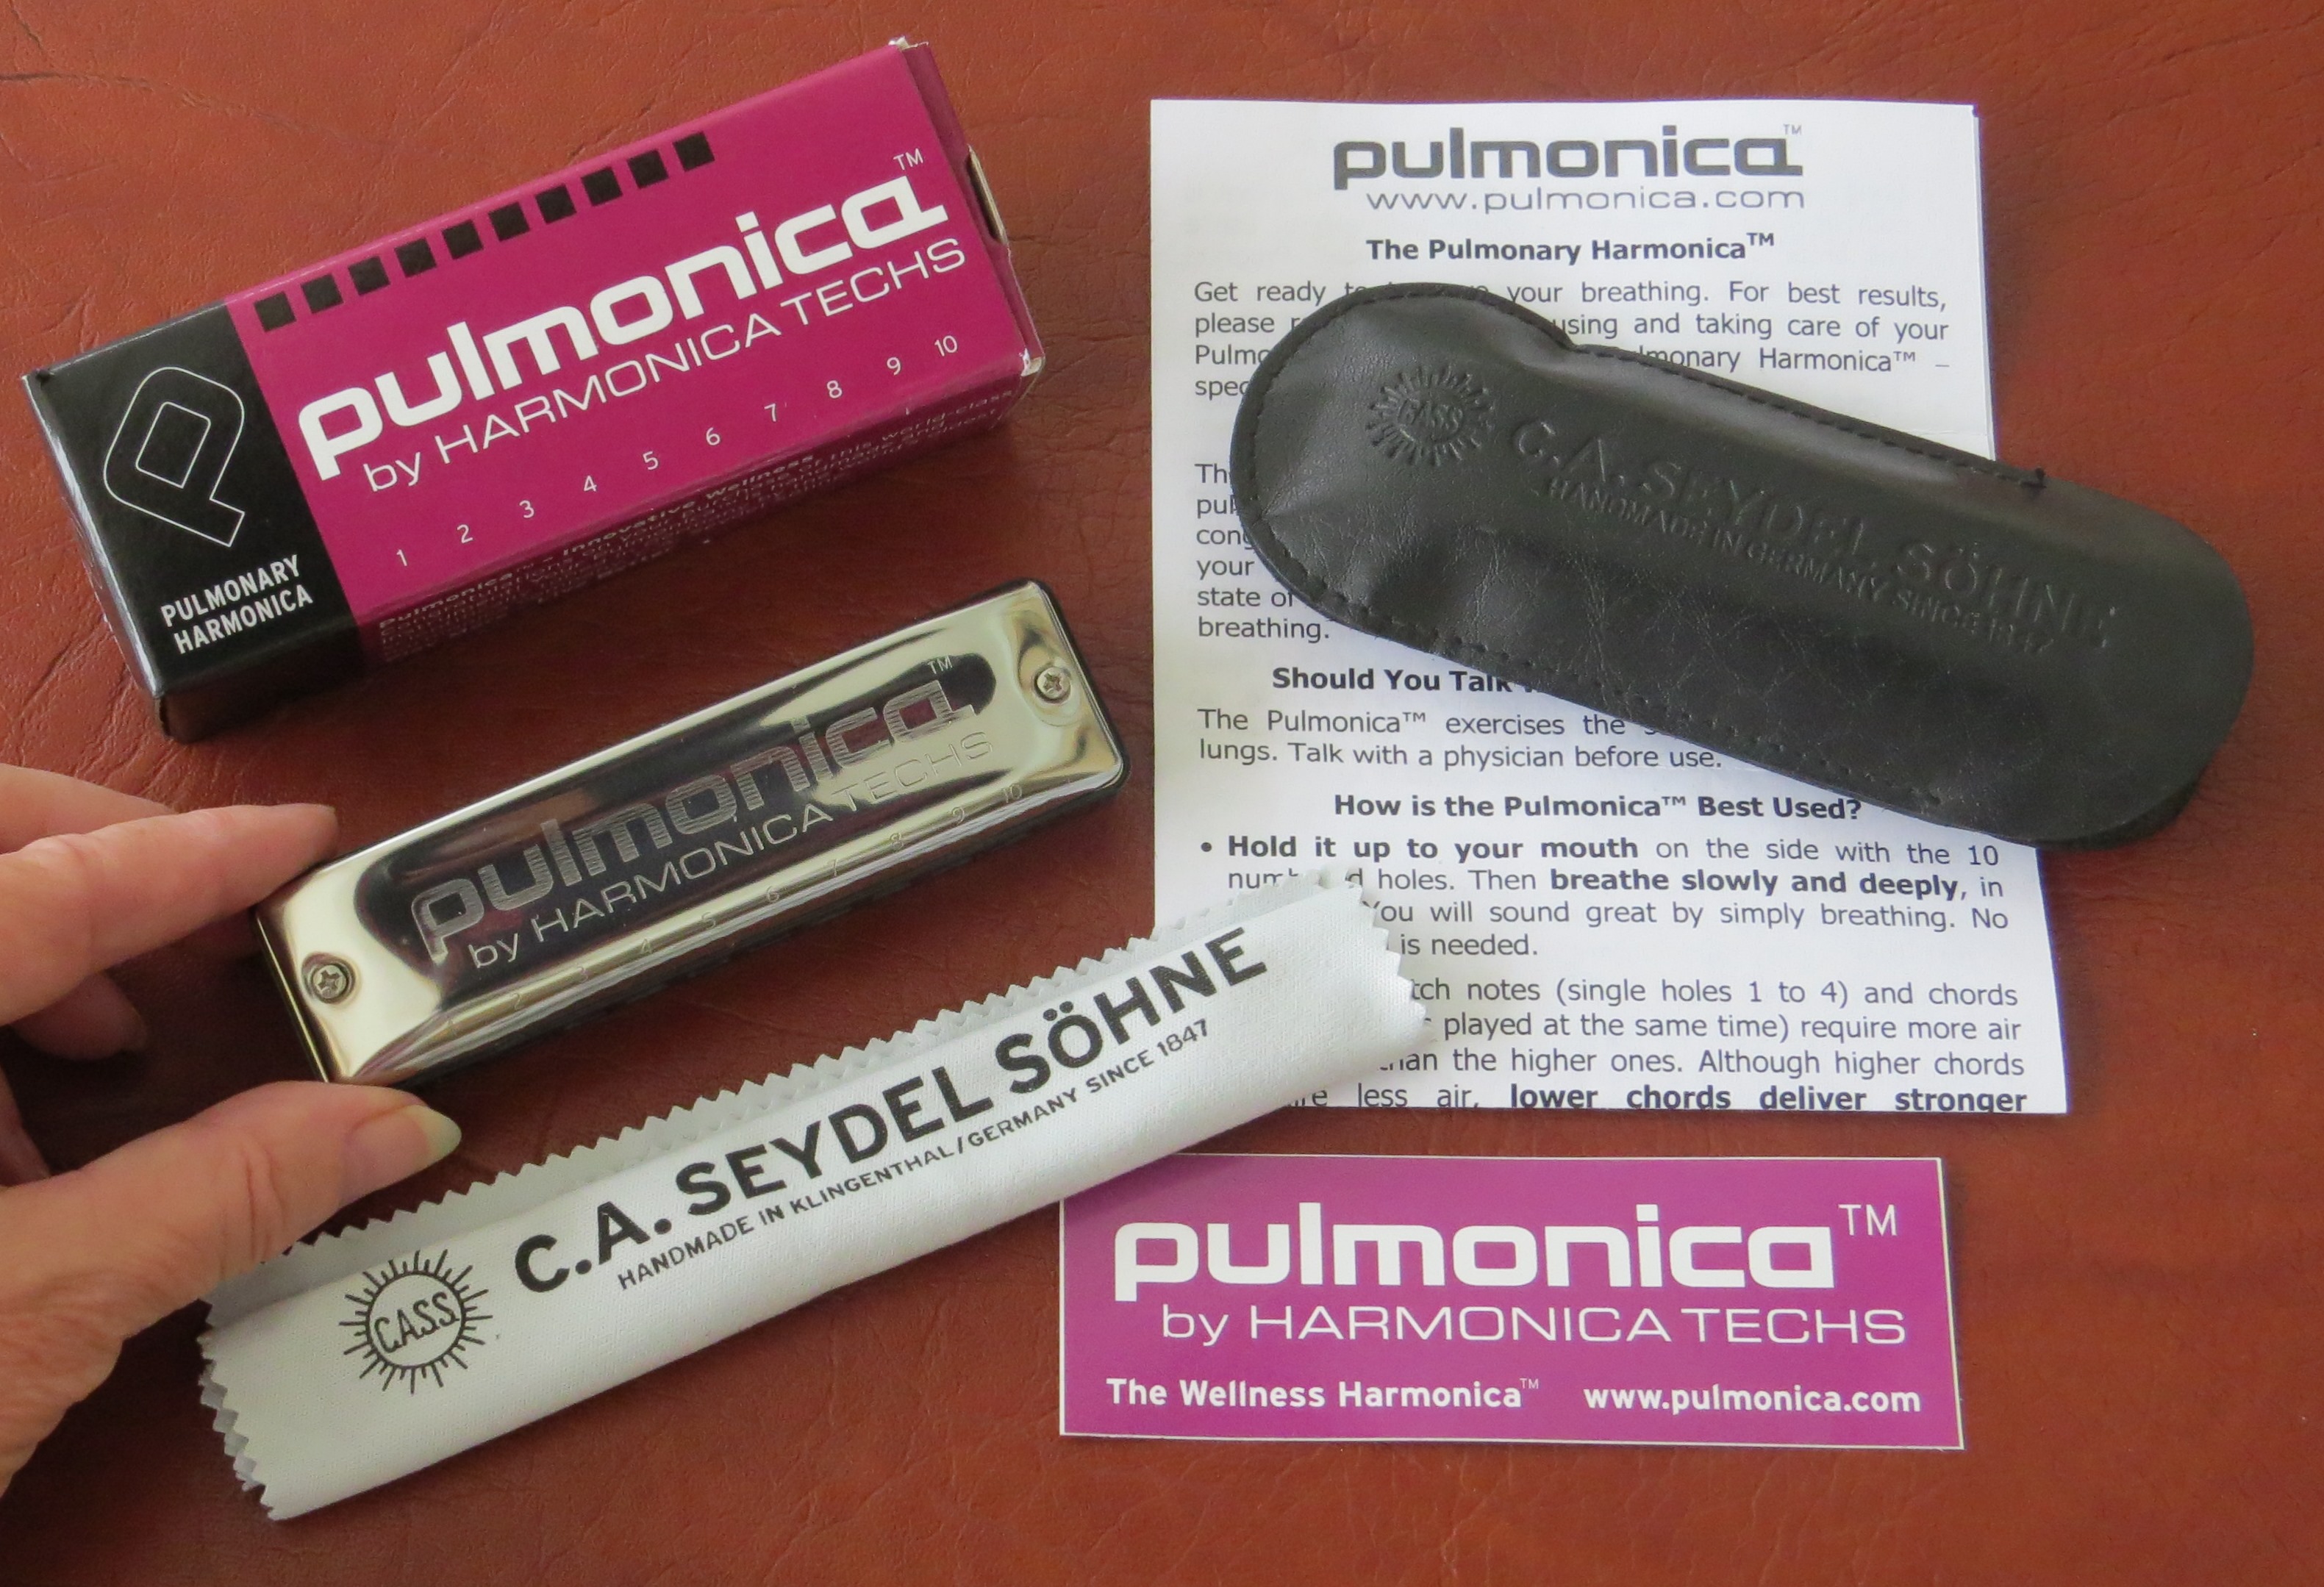 Pulmonica comes with instructions for use and care, plus a cleaning cloth and carrying case.